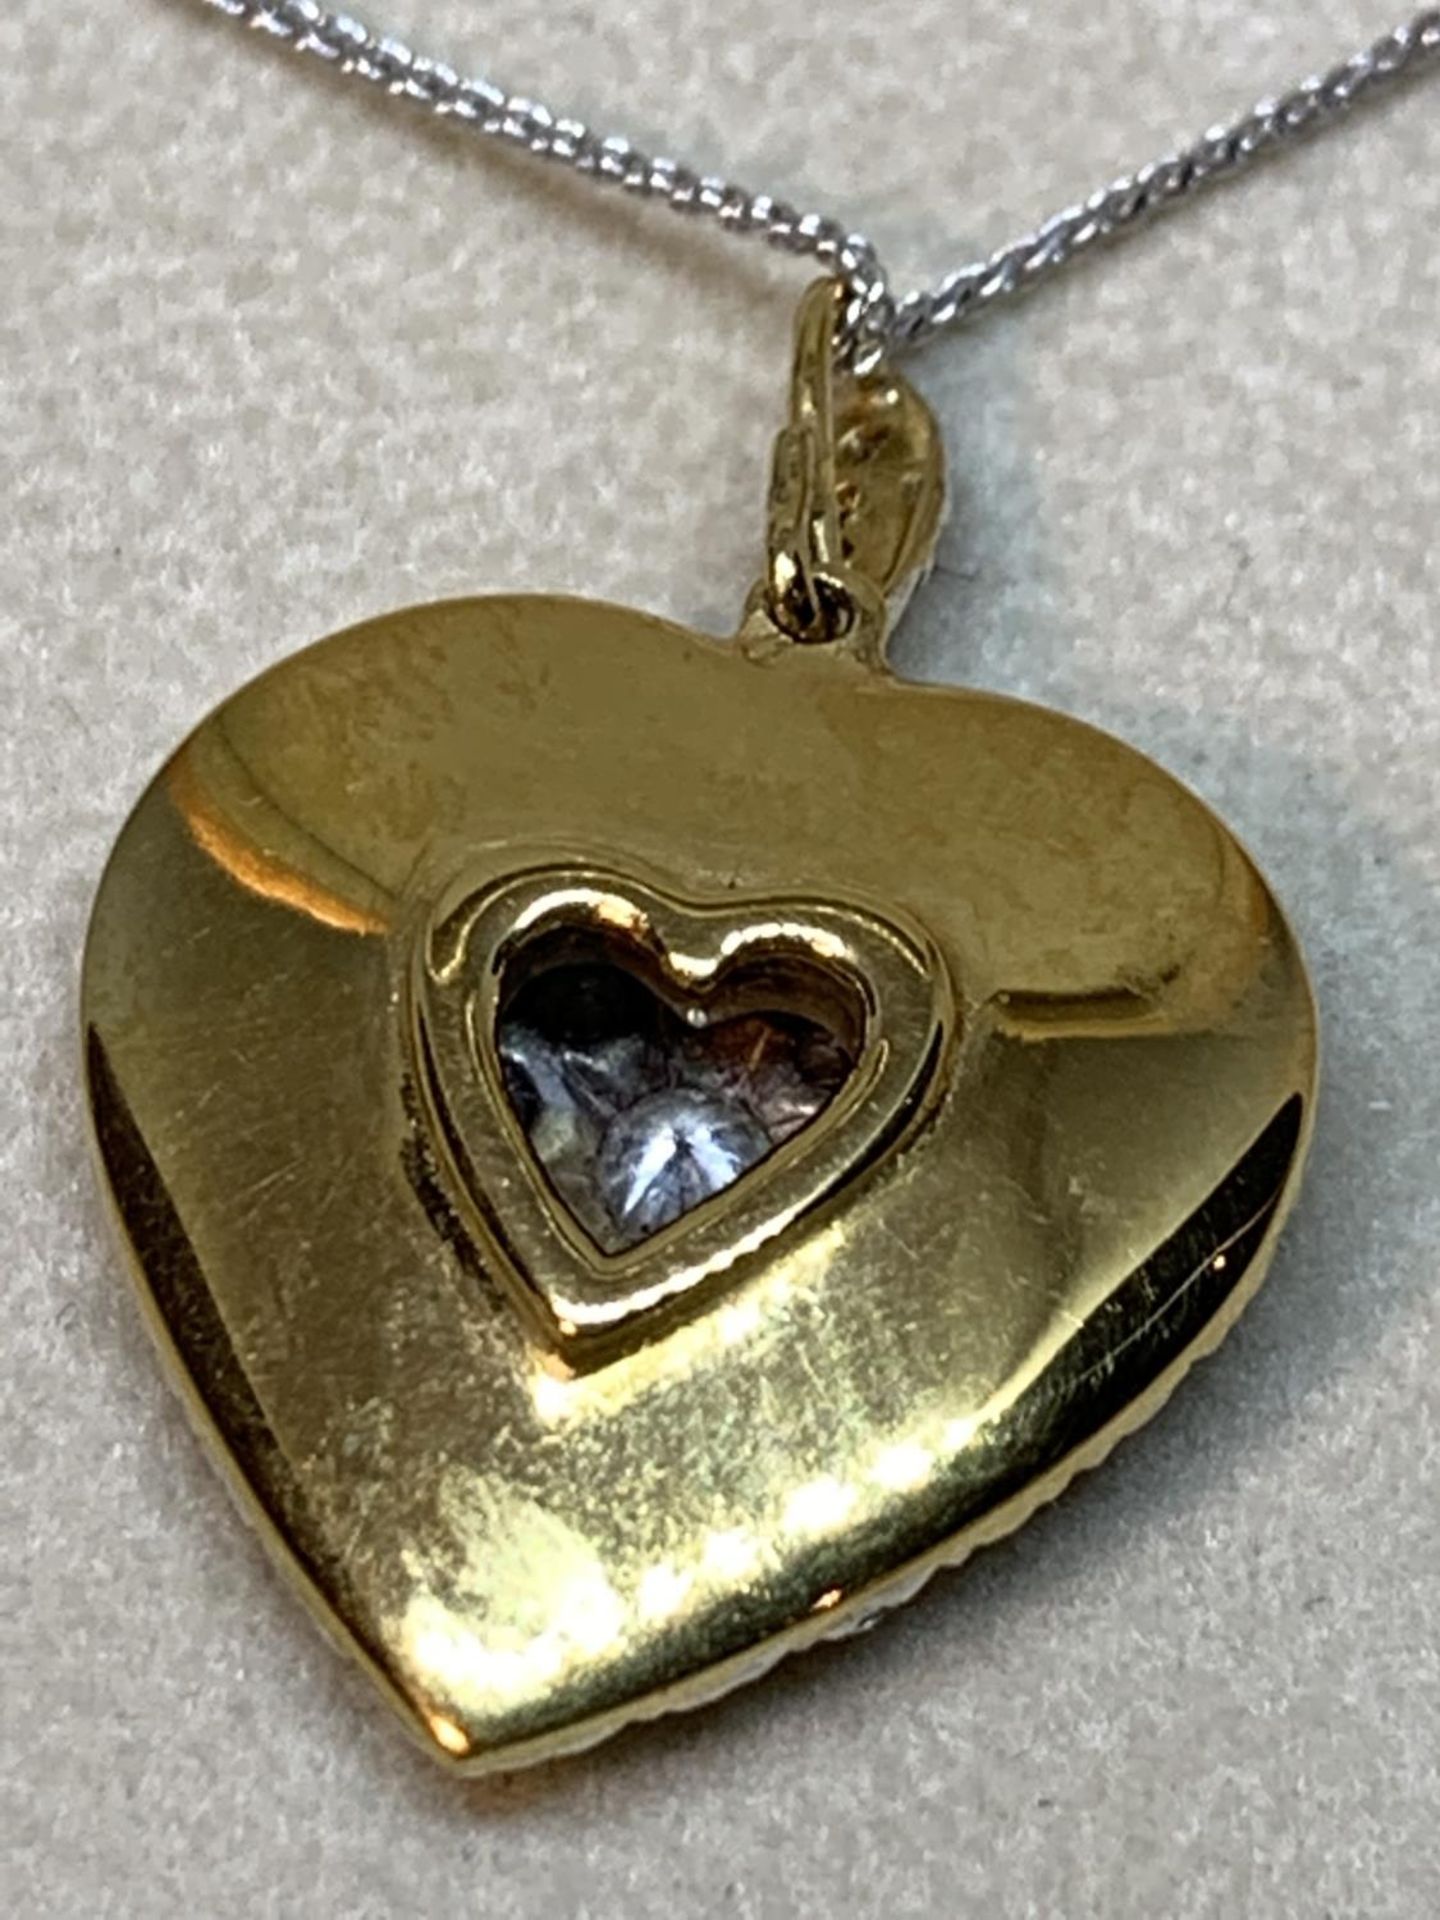 A 15 CARAT WHITE AND YELLOW GOLD LARGE DIAMOND ENCRUSTED HEART PENDANT WITH CHAIN LENGTH 44CM IN A - Image 6 of 8